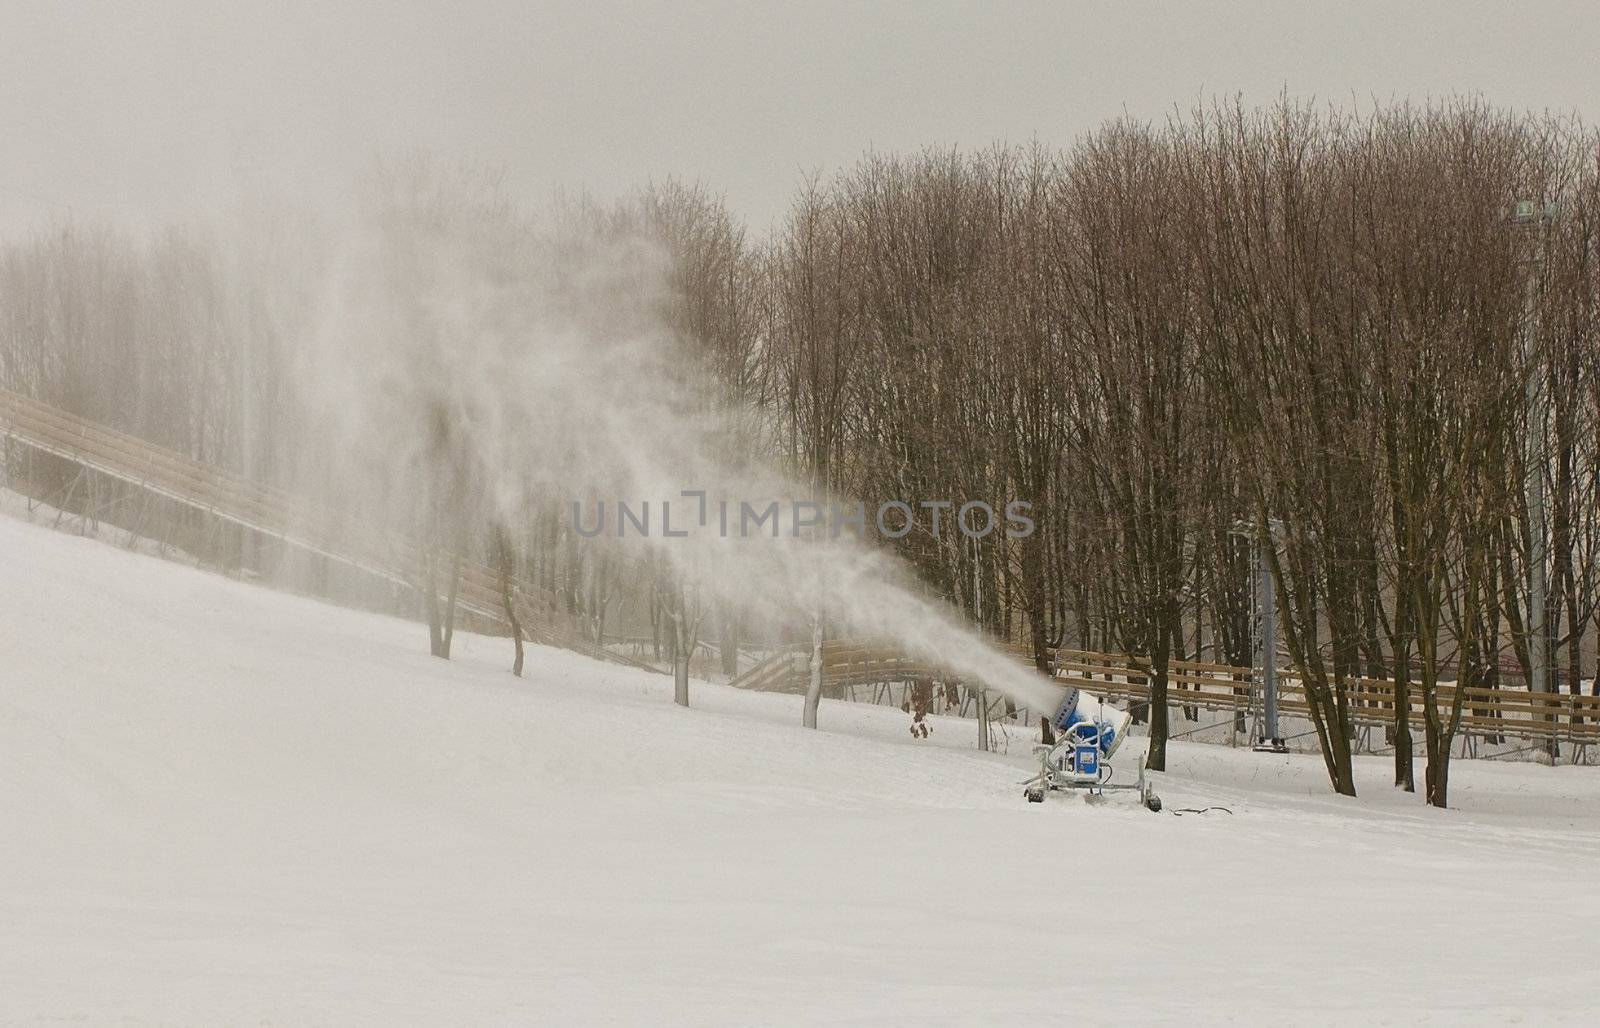 snow cannon making artificial snow